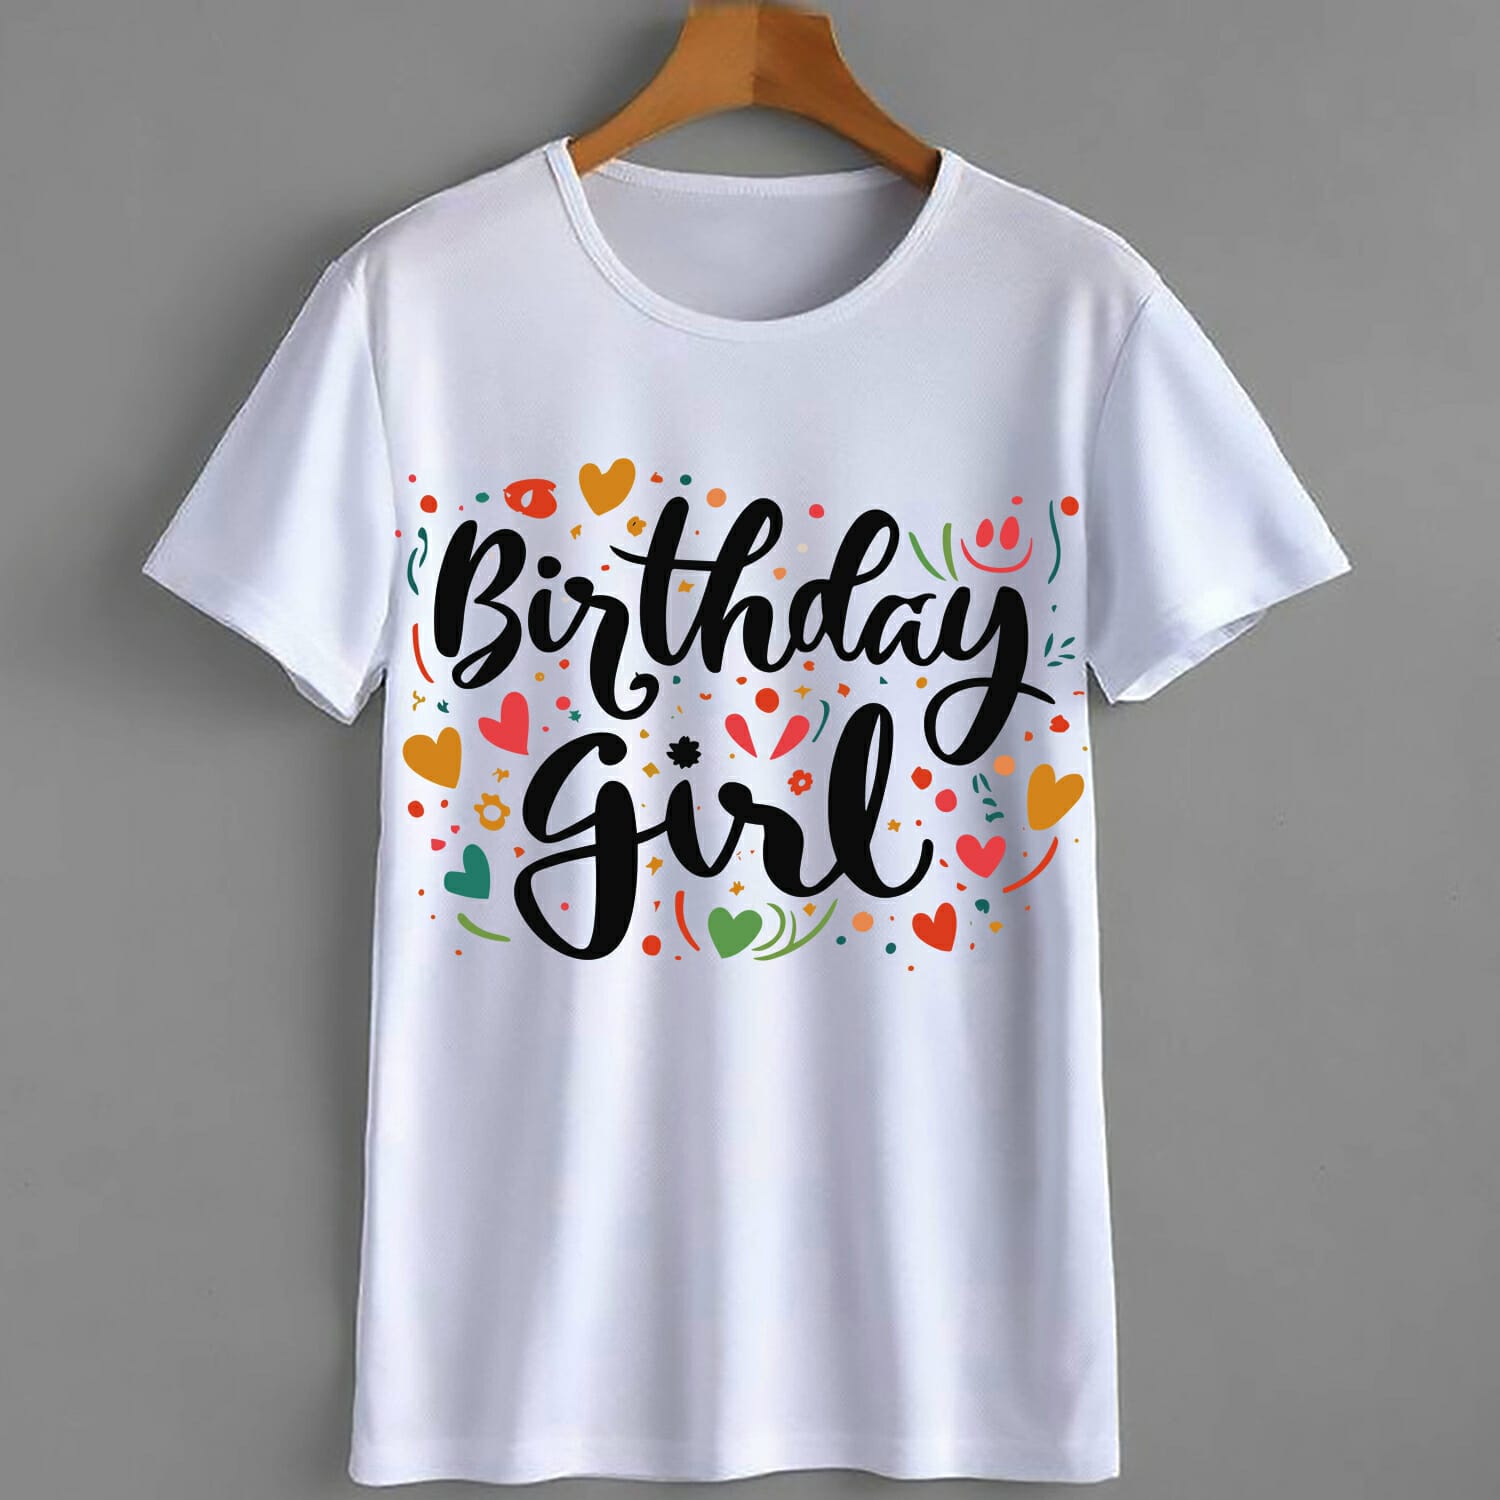 Birthday Girl with hearts T-Shirt Design